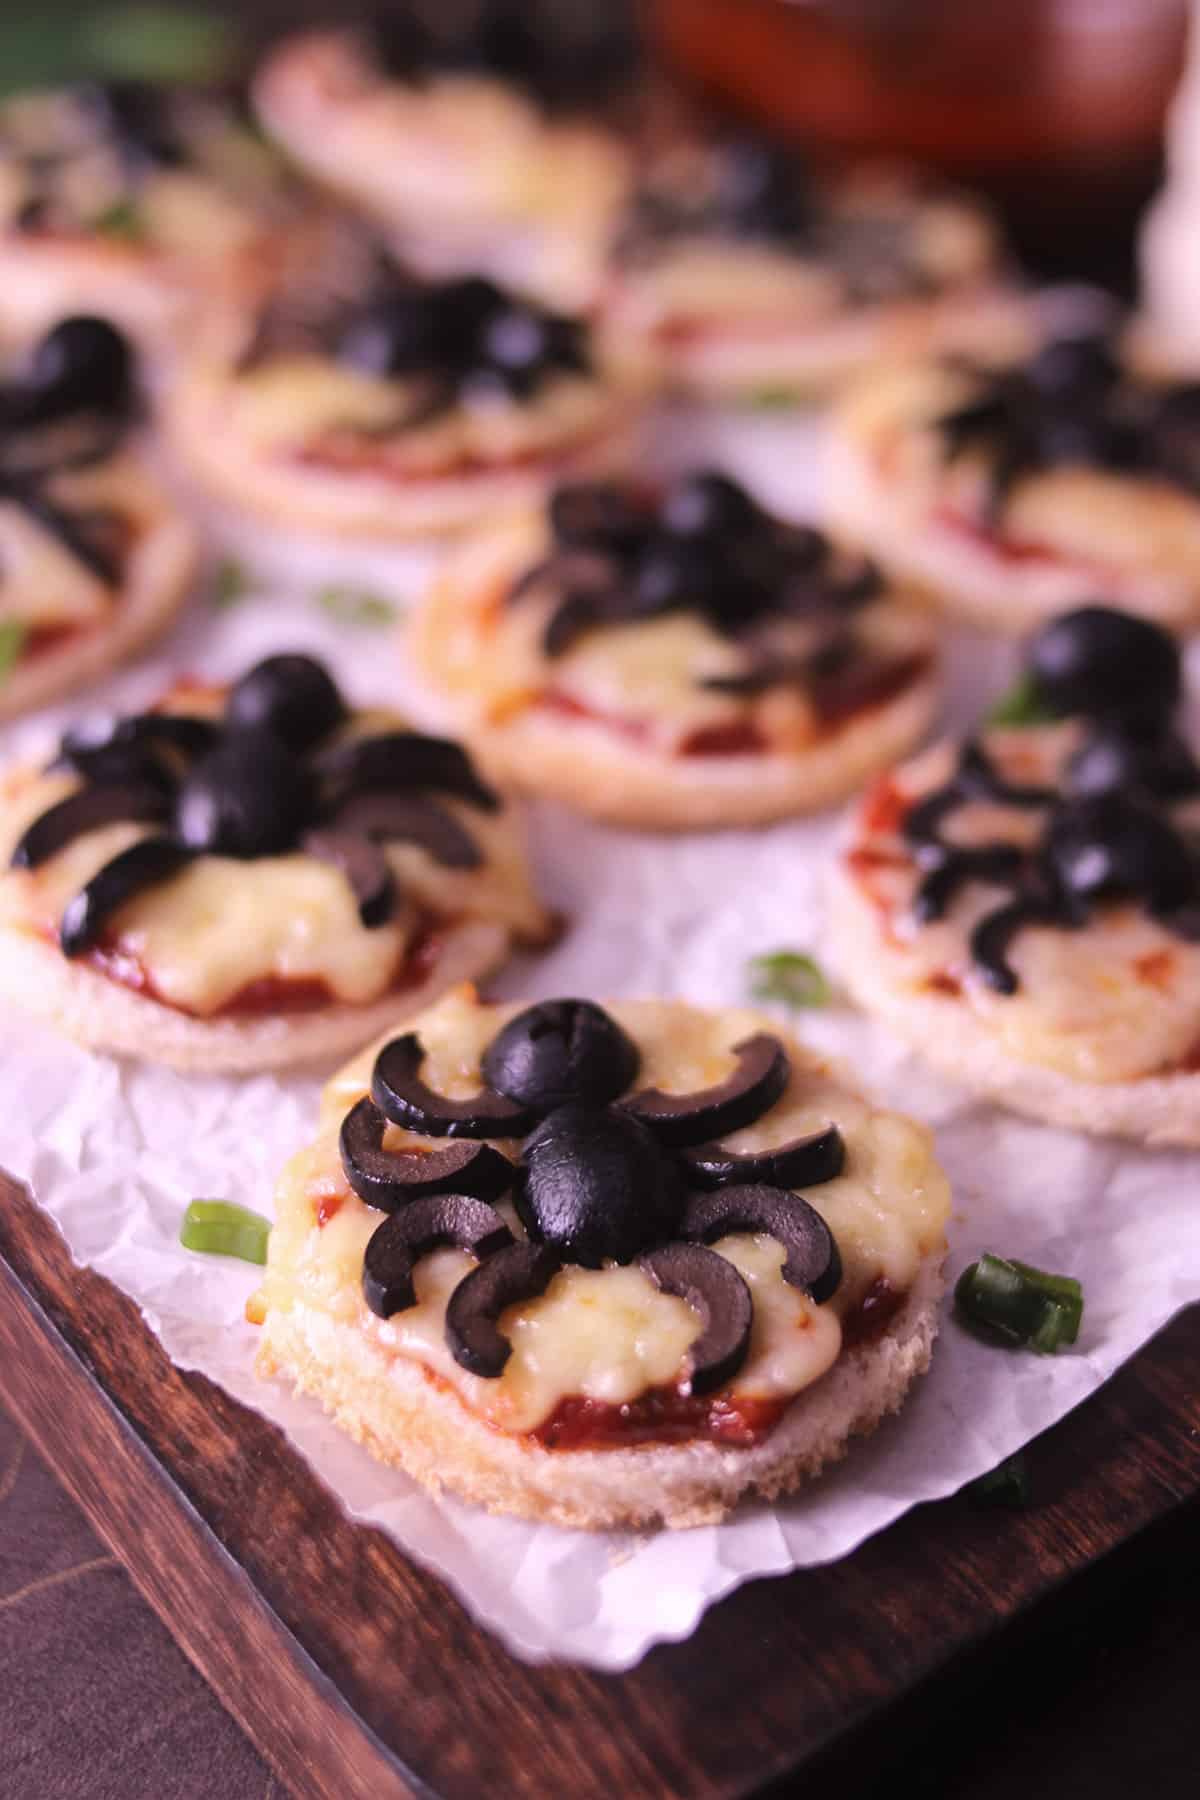 Halloween themed pizza with bread, mozzarella cheese, pizza sauce and black olives